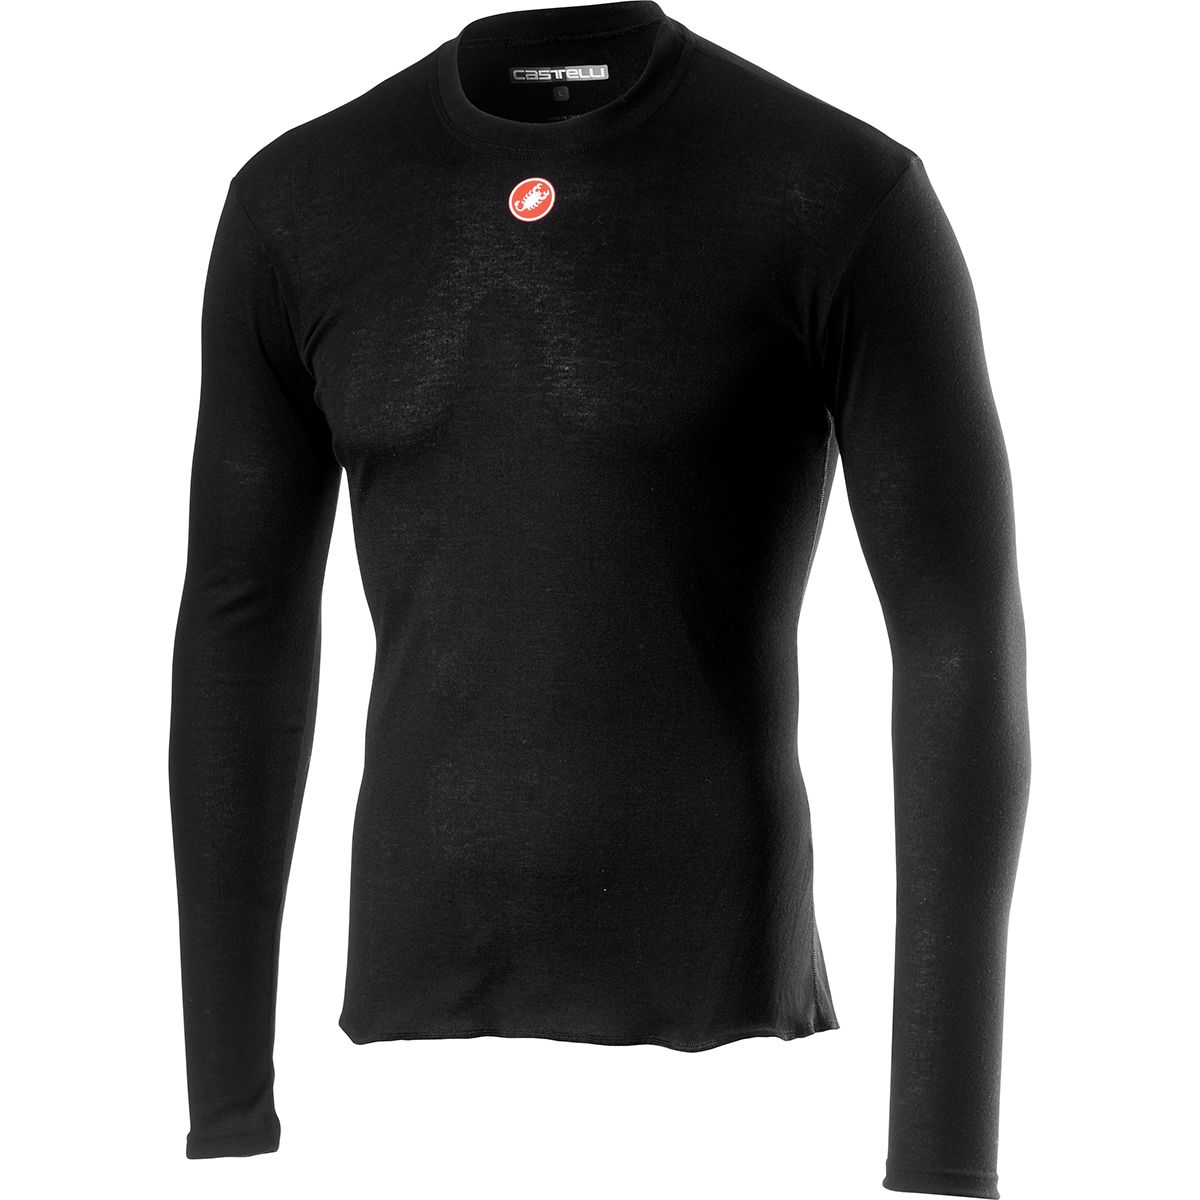 Castelli Prosecco R Long-Sleeve Base Layer Top - Men's